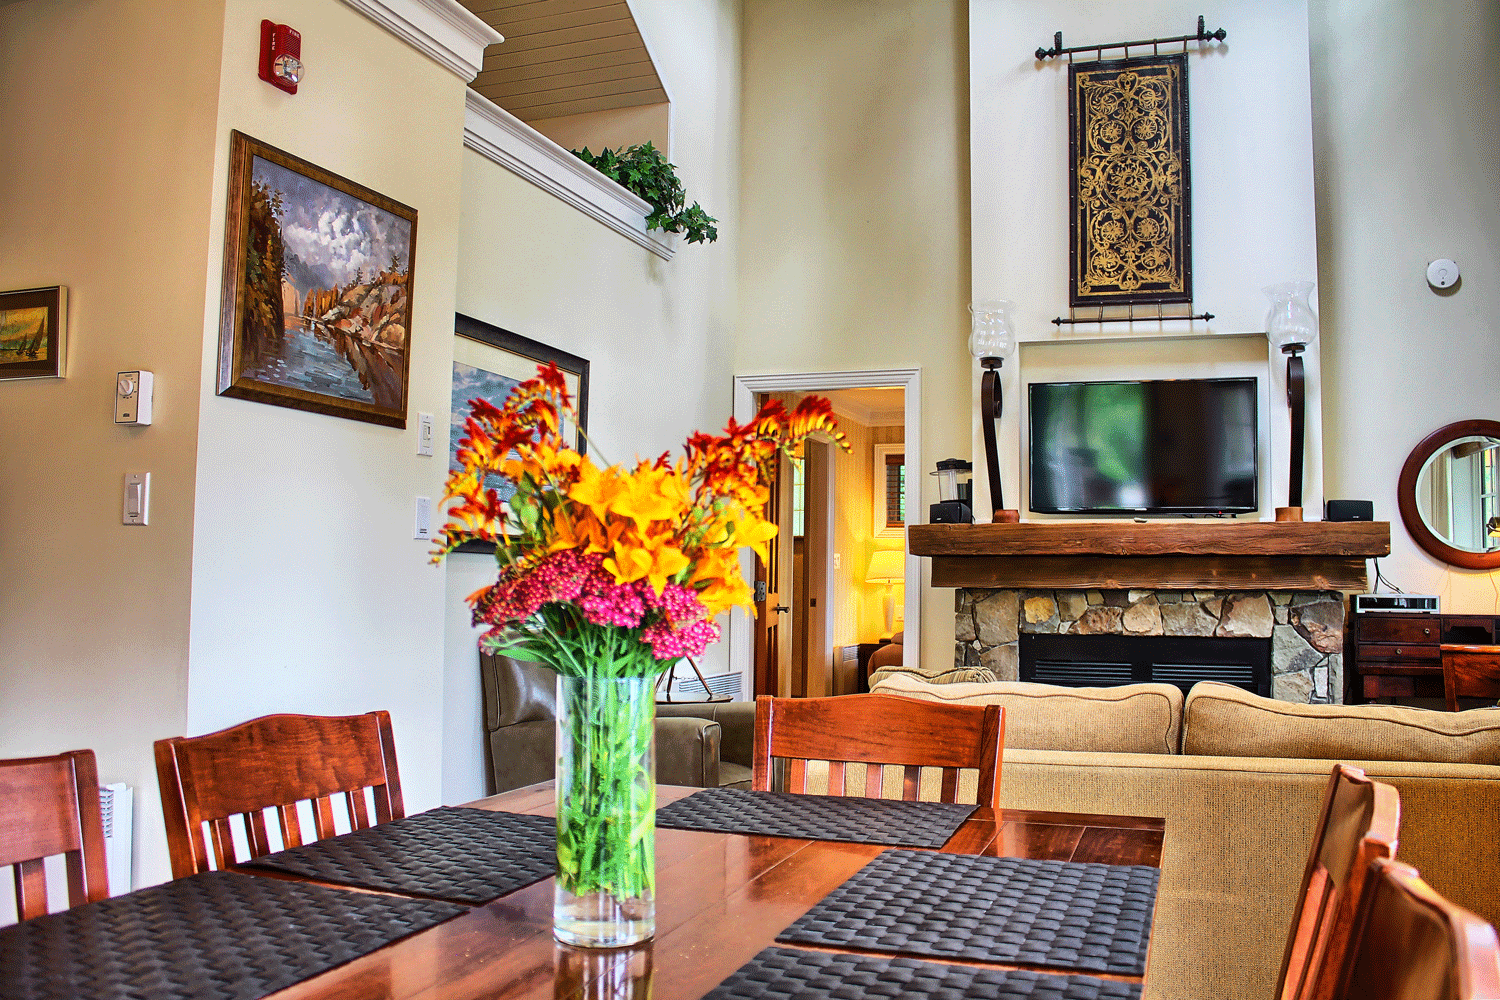 flowers on dining table next to fireplace and tv